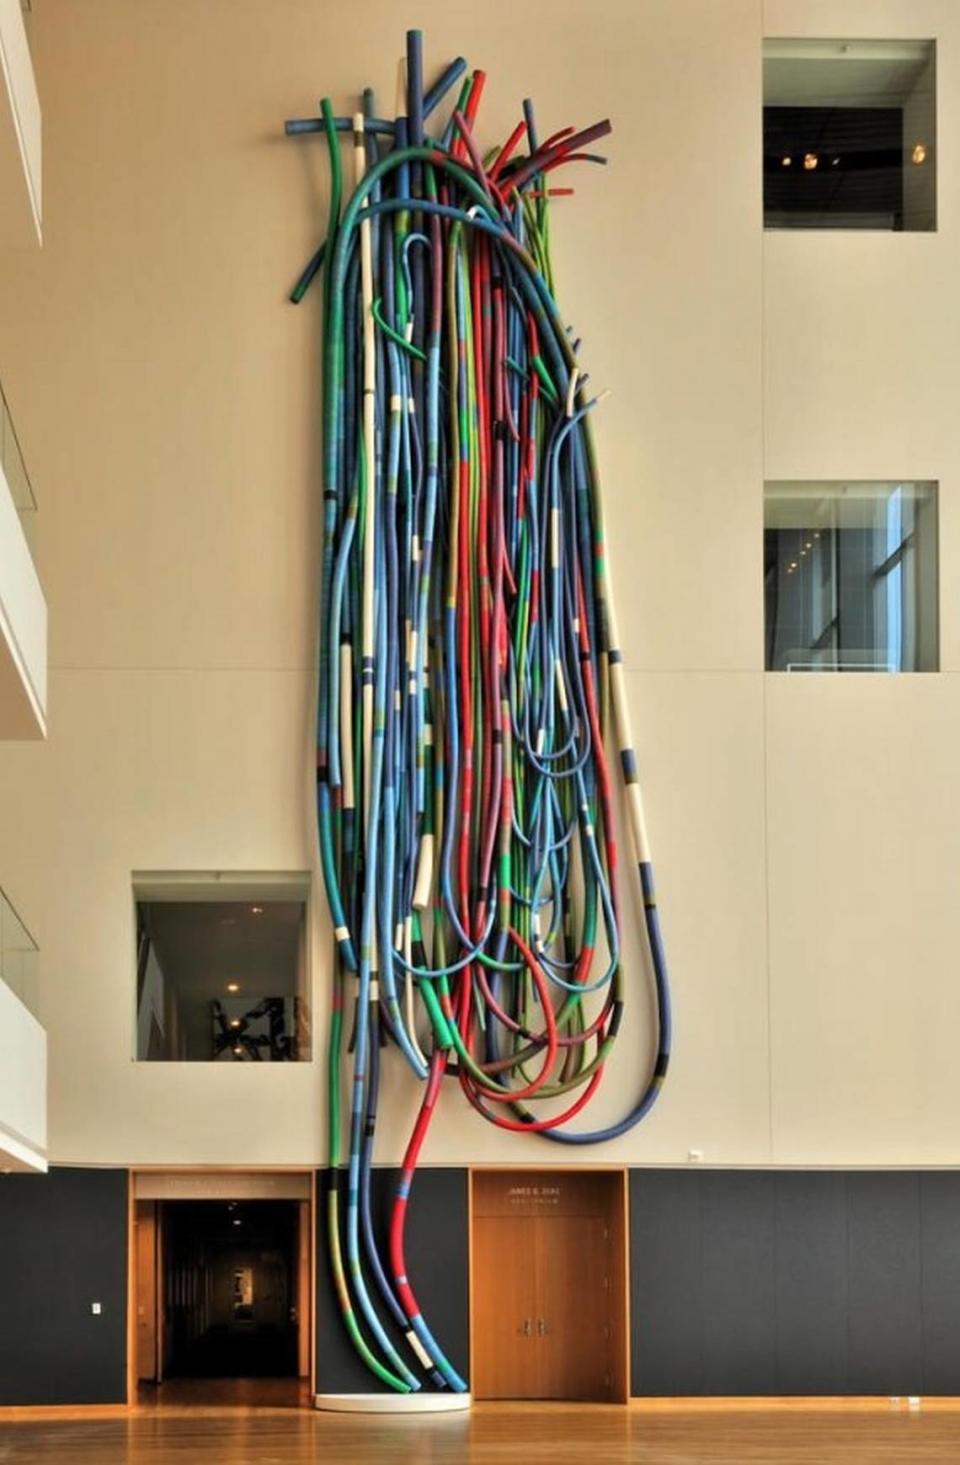 Sheila Hicks (American, 1934—). Mega Footprint Near the Hutch (May I Have This Dance?), 2011, sculpture in linen and cork. The Mint received a $40,000 grant from Bank of America to help conserve the piece.